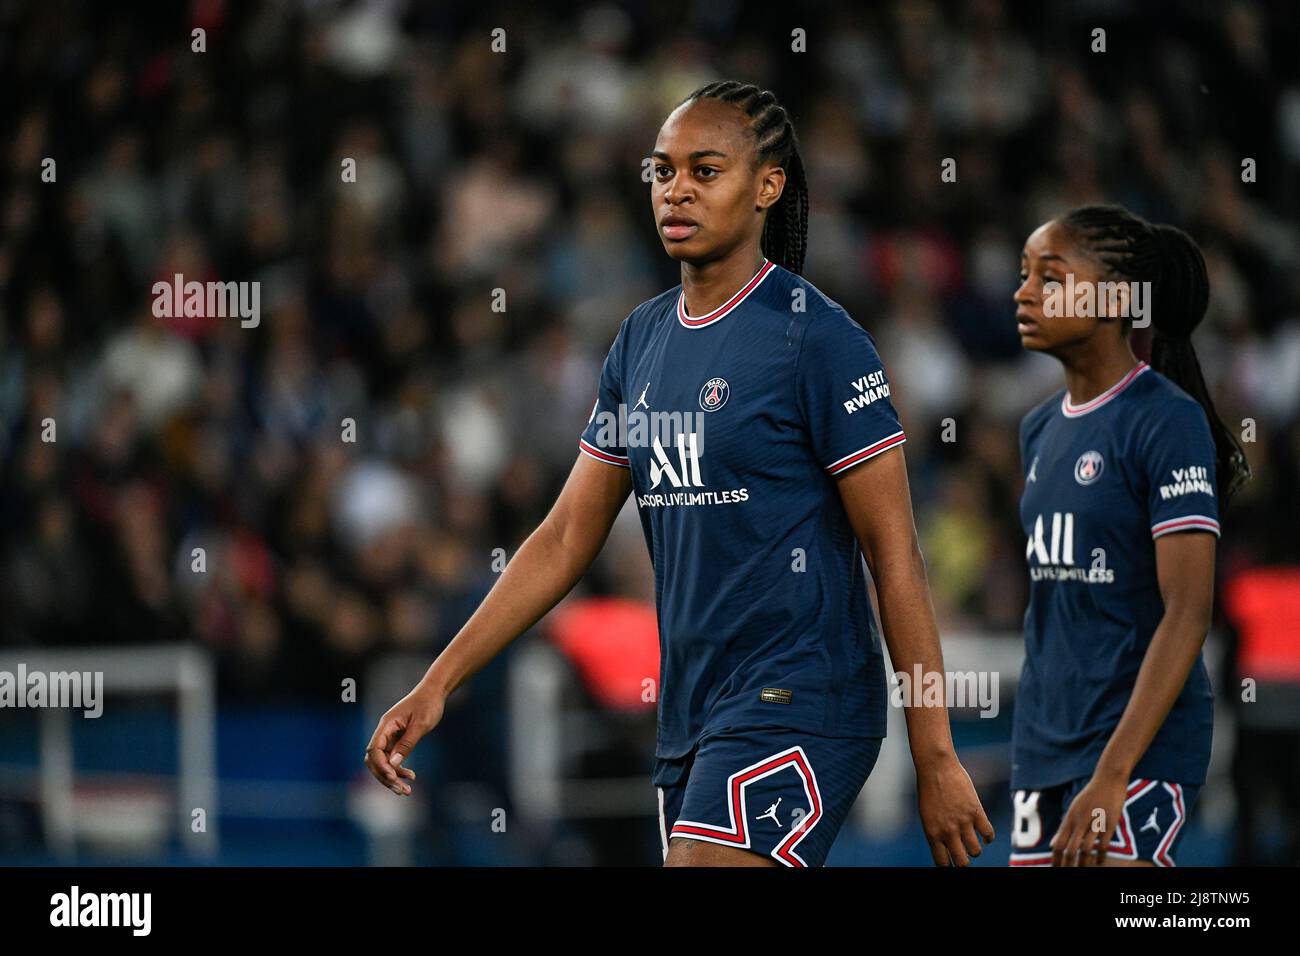 Marie Antoinette Katoto during the UEFA Women's Champions League, semi-finals, 2nd leg football match between Paris Saint-Germain (PSG) and Olympique Stock Photo